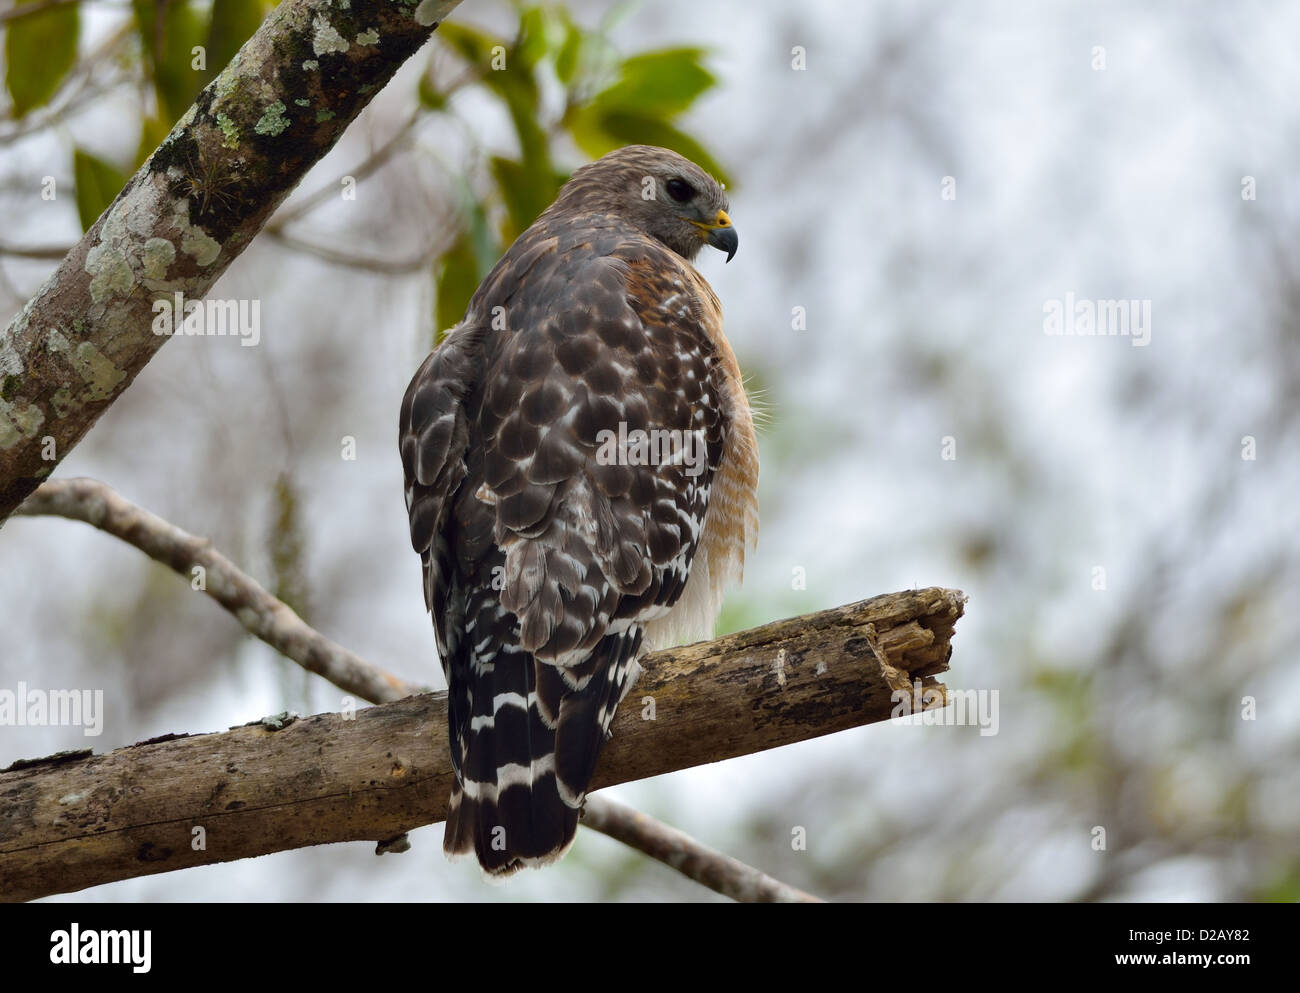 A red-shouldered hawk standing on a tree limb. Big Cypress National Preserve, Florida, USA. Stock Photo